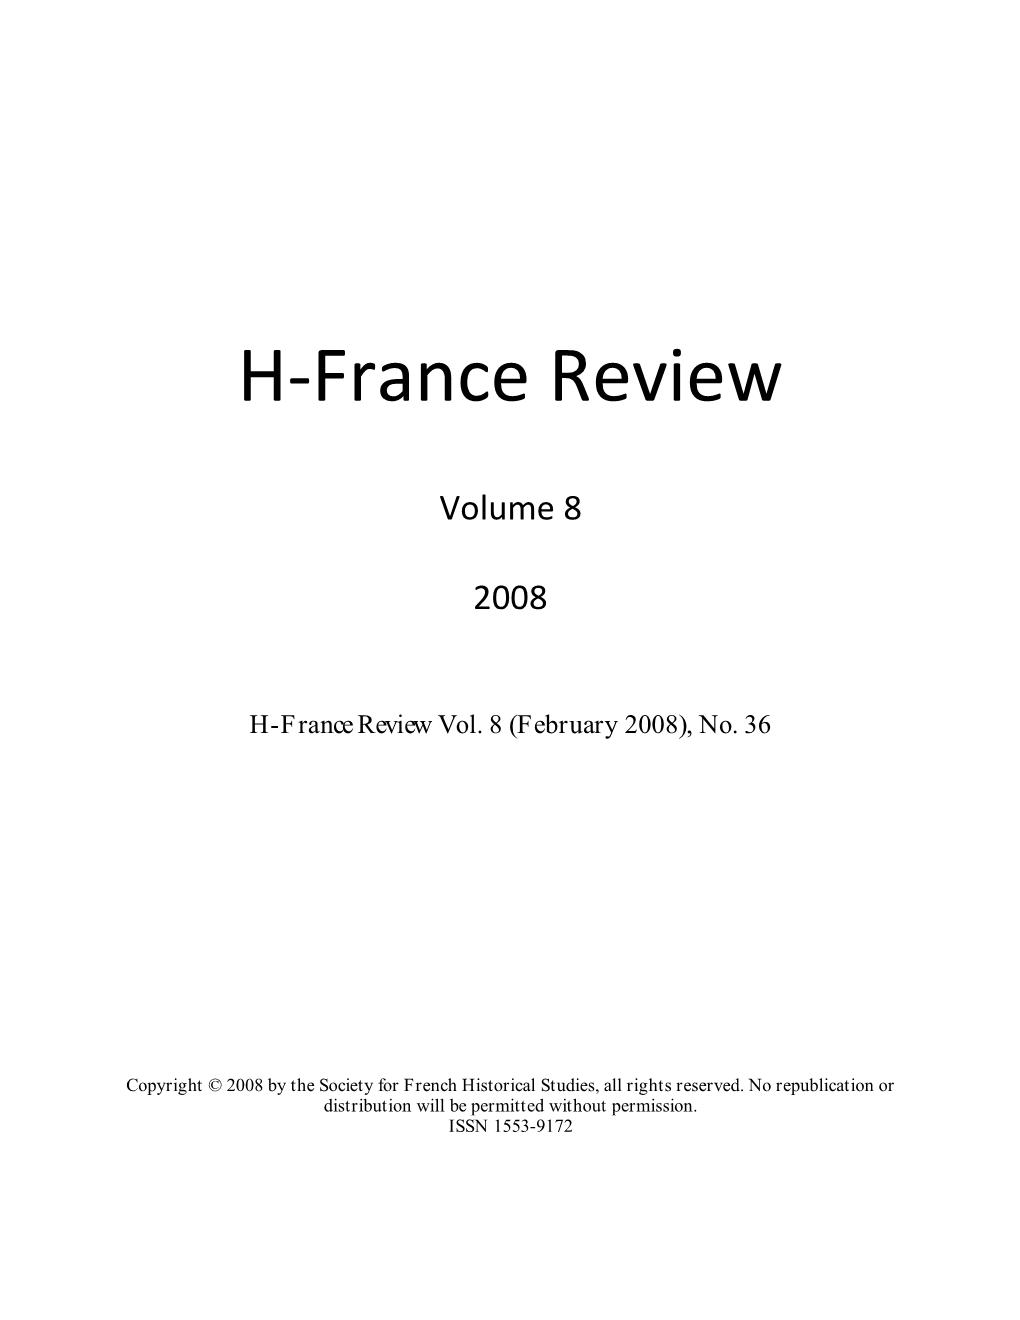 H-France Review Vol. 8 (February 2008), No. 36